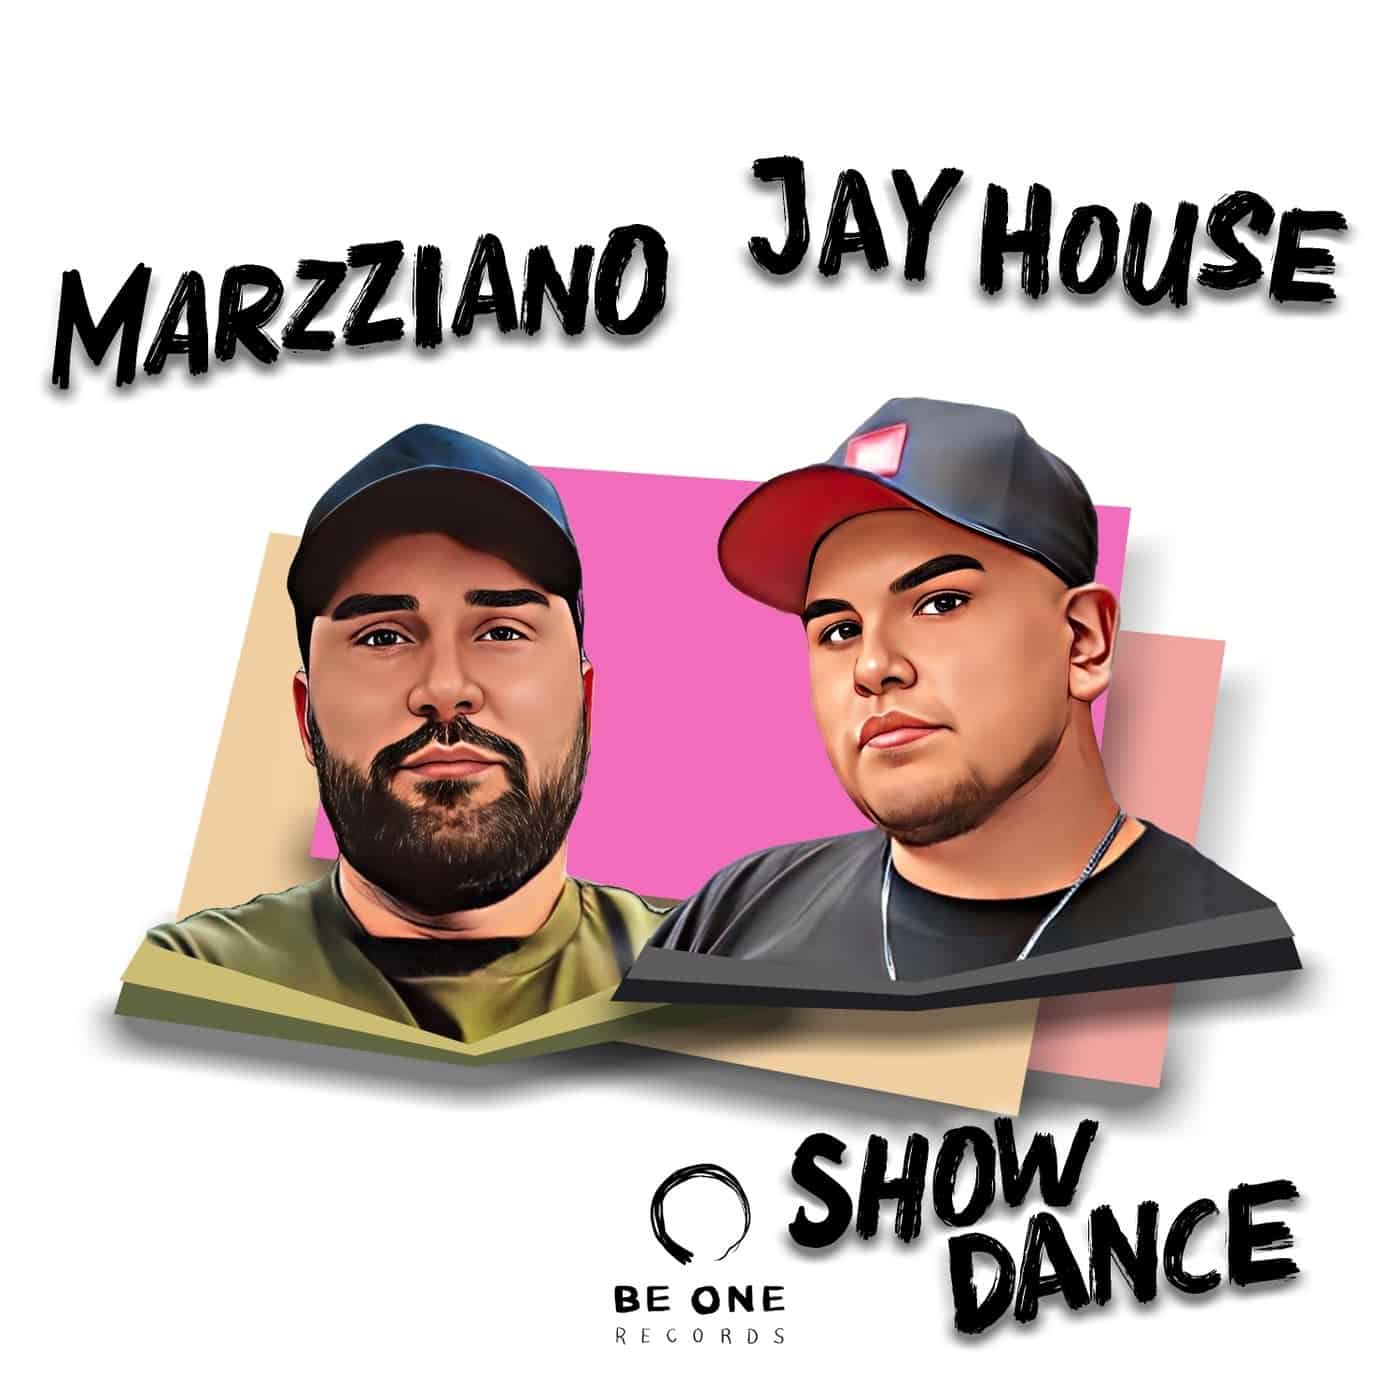 image cover: Marzziano, Jay House - Show Dance / BOR380